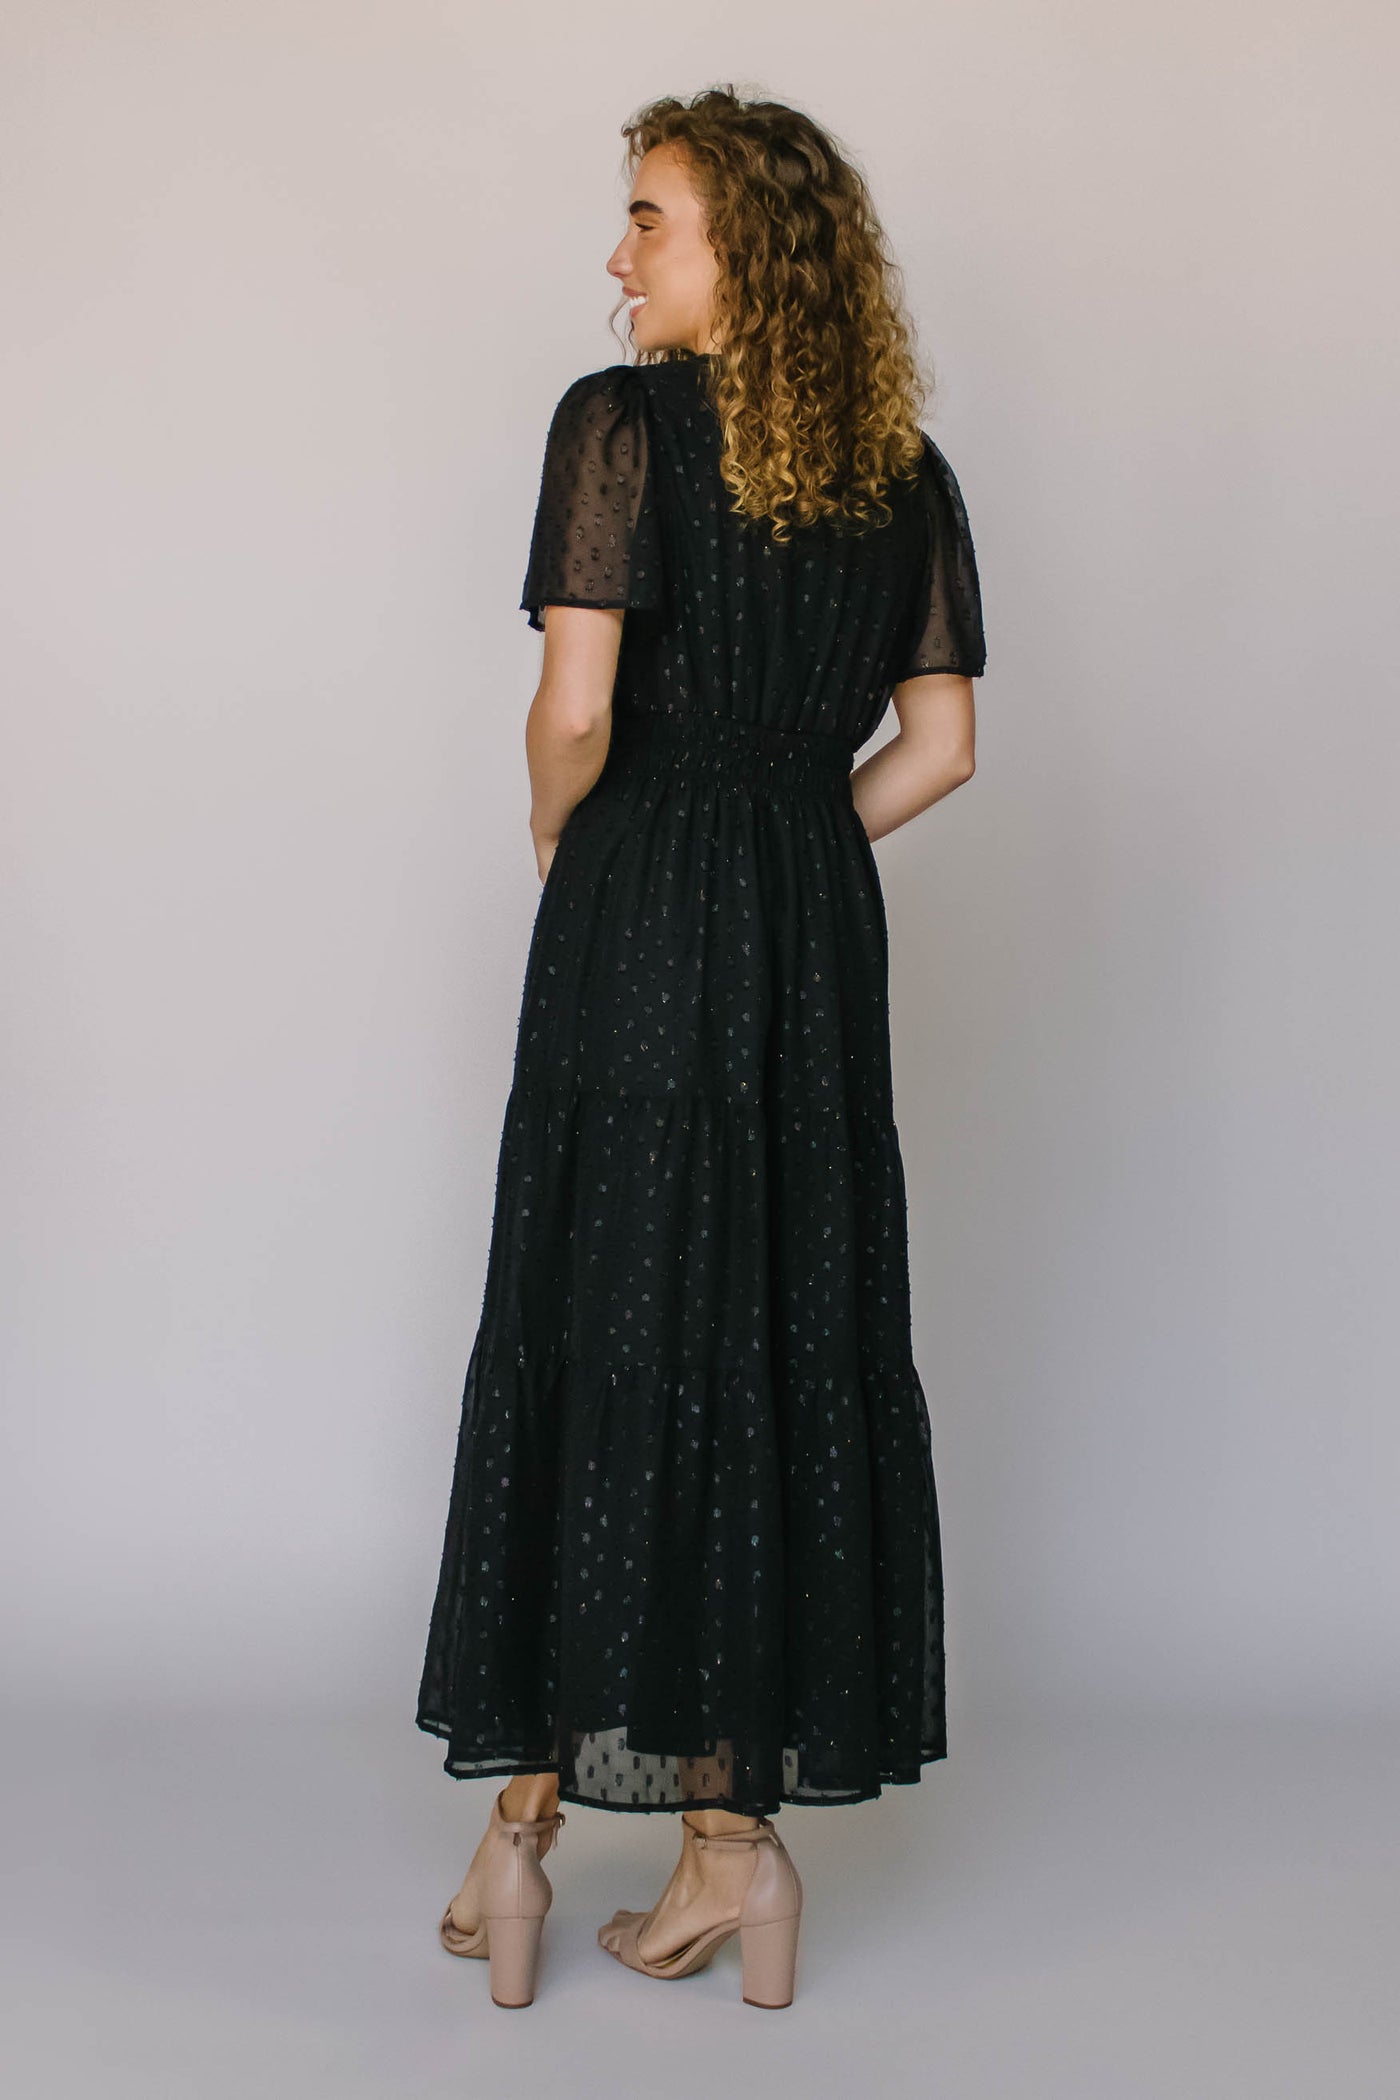 The back of a modest dress in black with a shimmery black spotted fabric, a defined waist, and flutter sleeves.